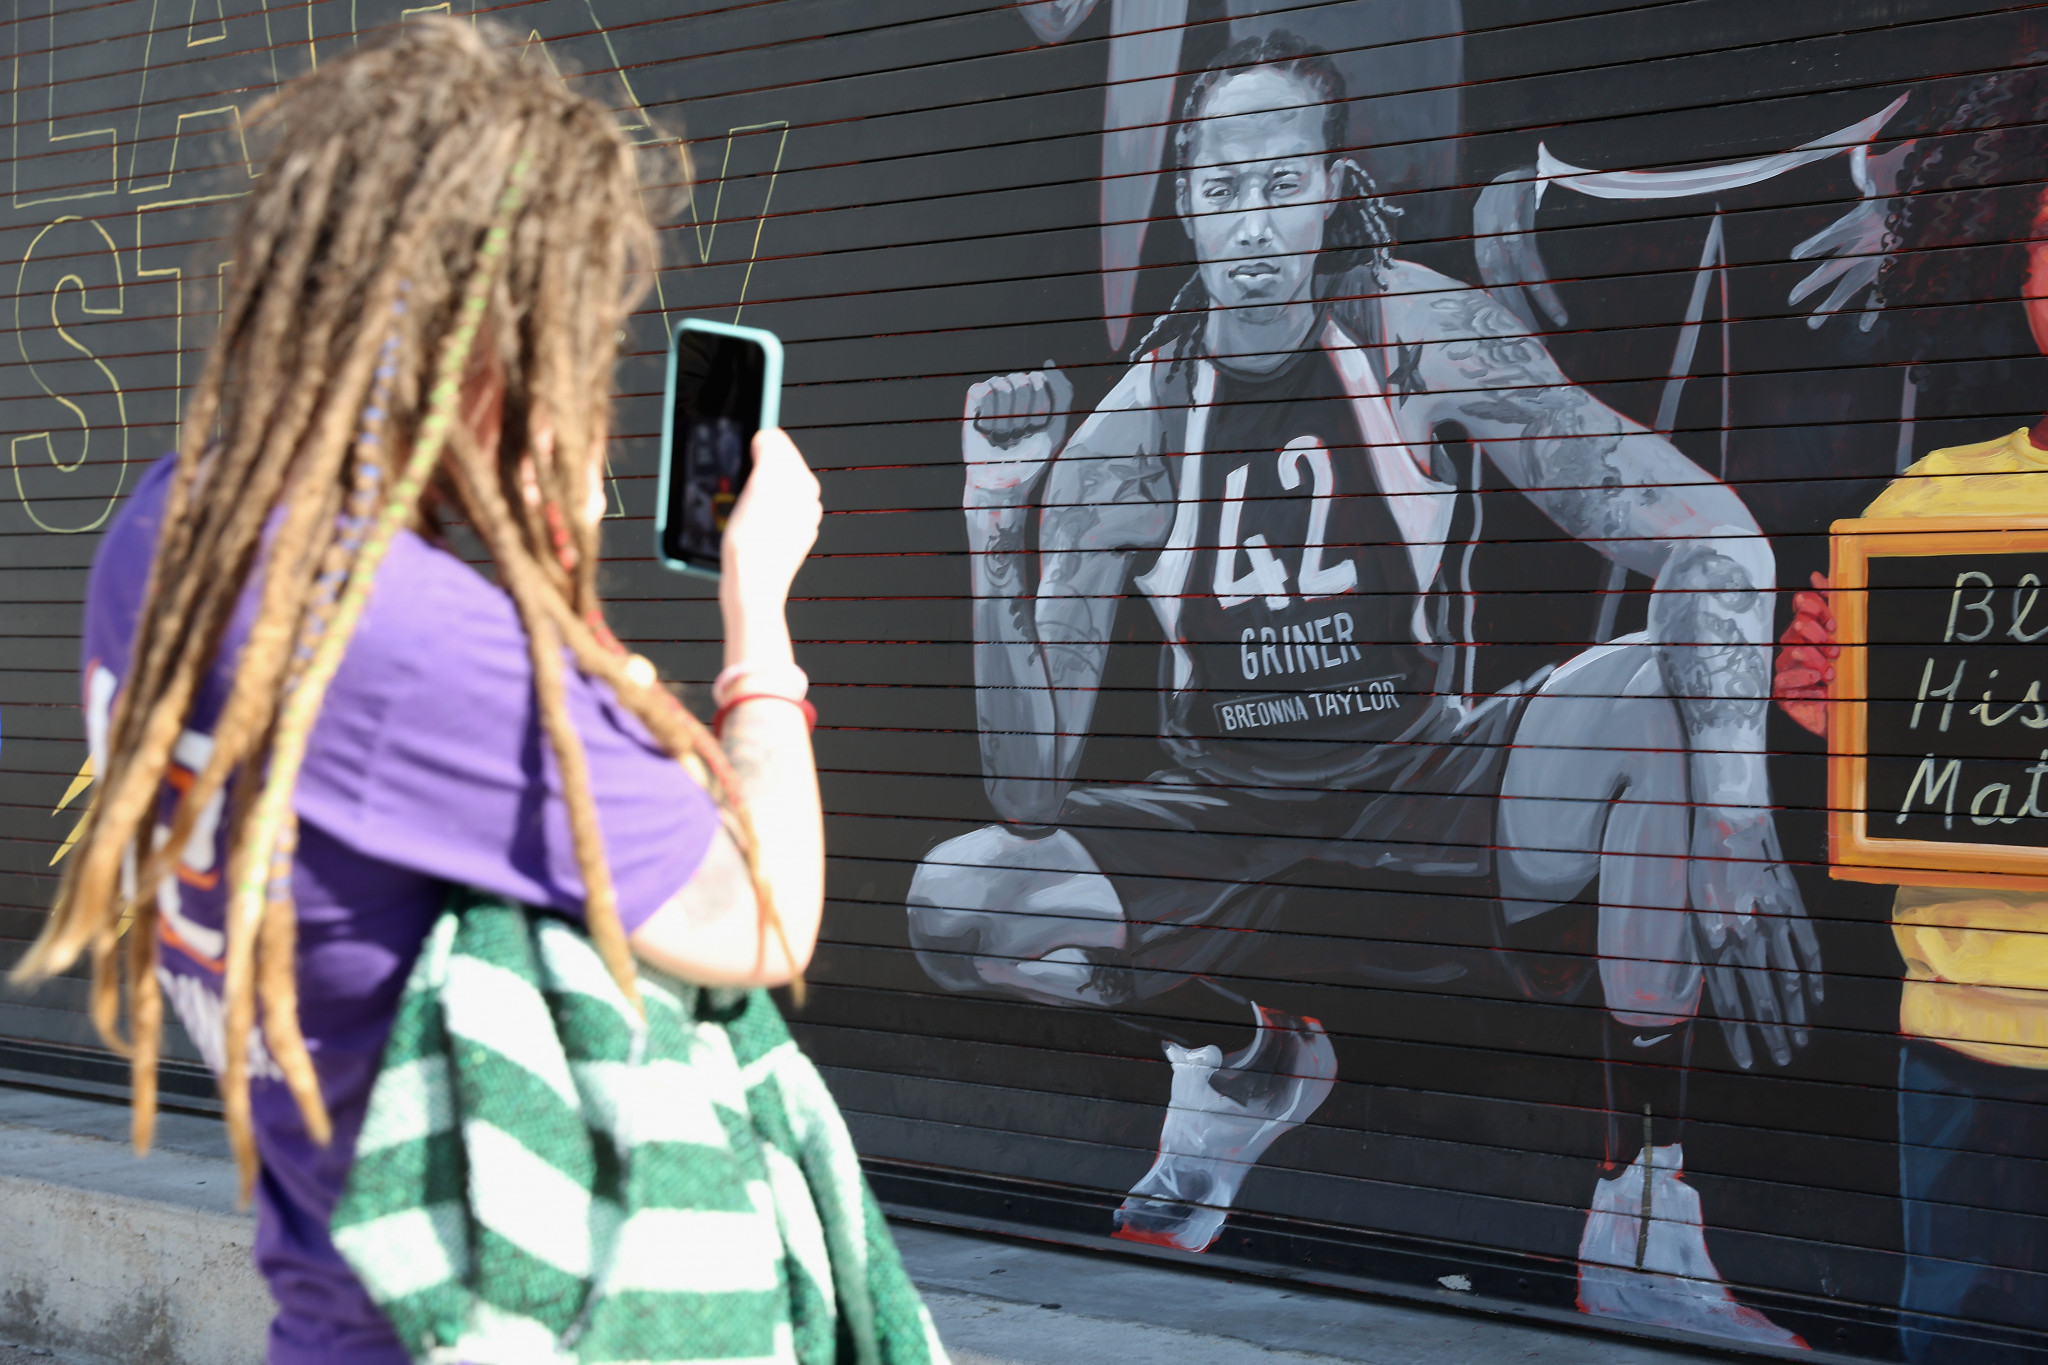 US basketball star Brittney Griner, sentenced to nine years in a Russian penal colony for possessing cannabis oil, returned this week as part of a prisoner swap ©Getty Images